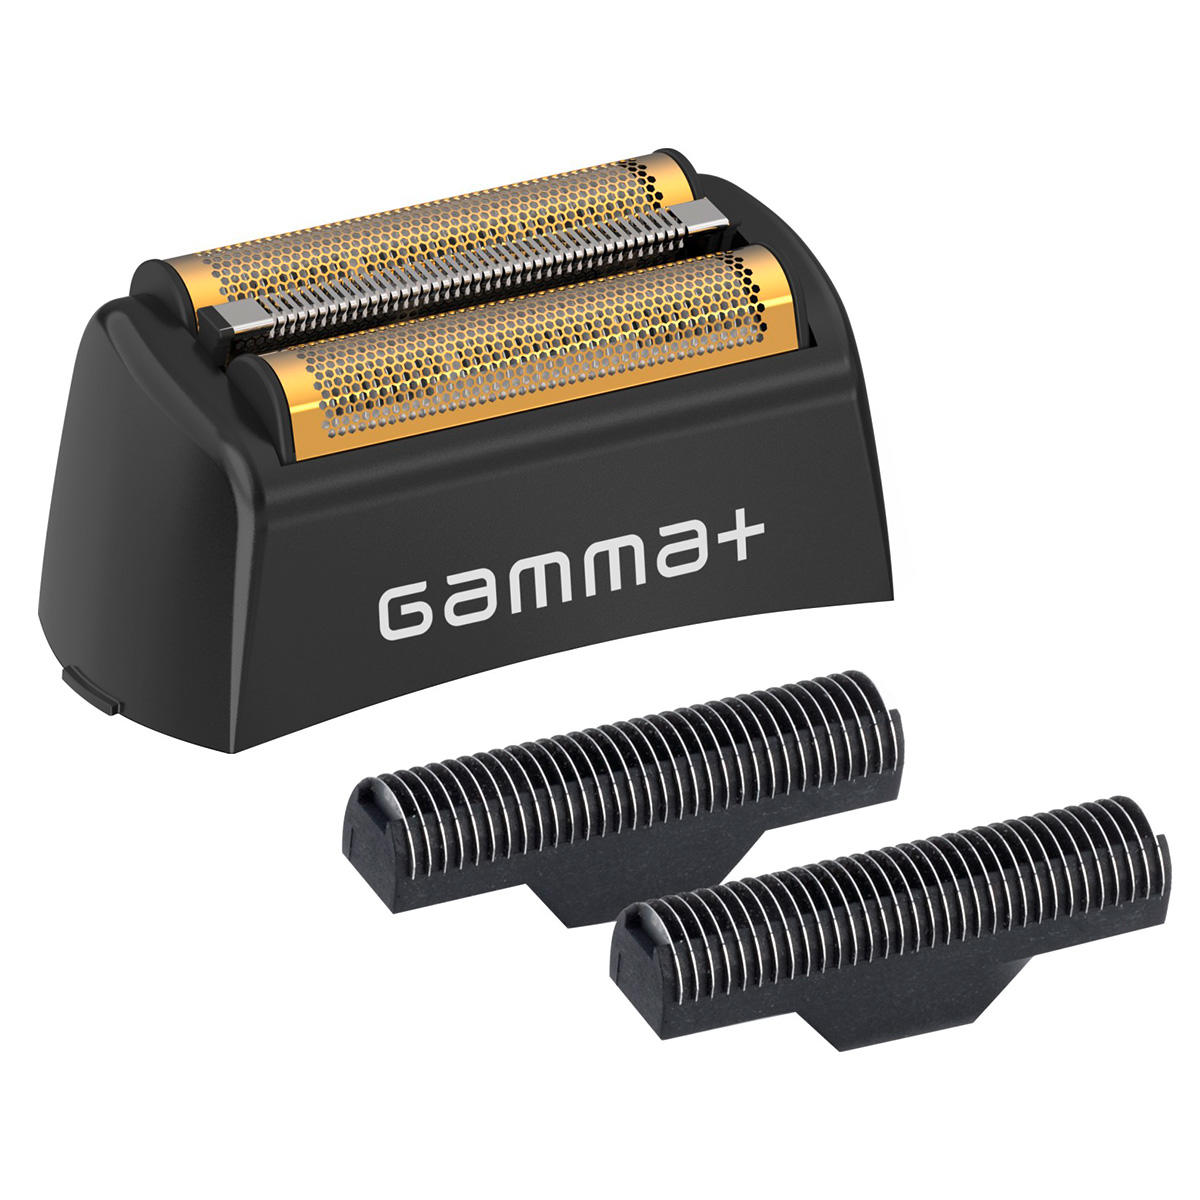 Gamma+ Boosted Shaver  - 5